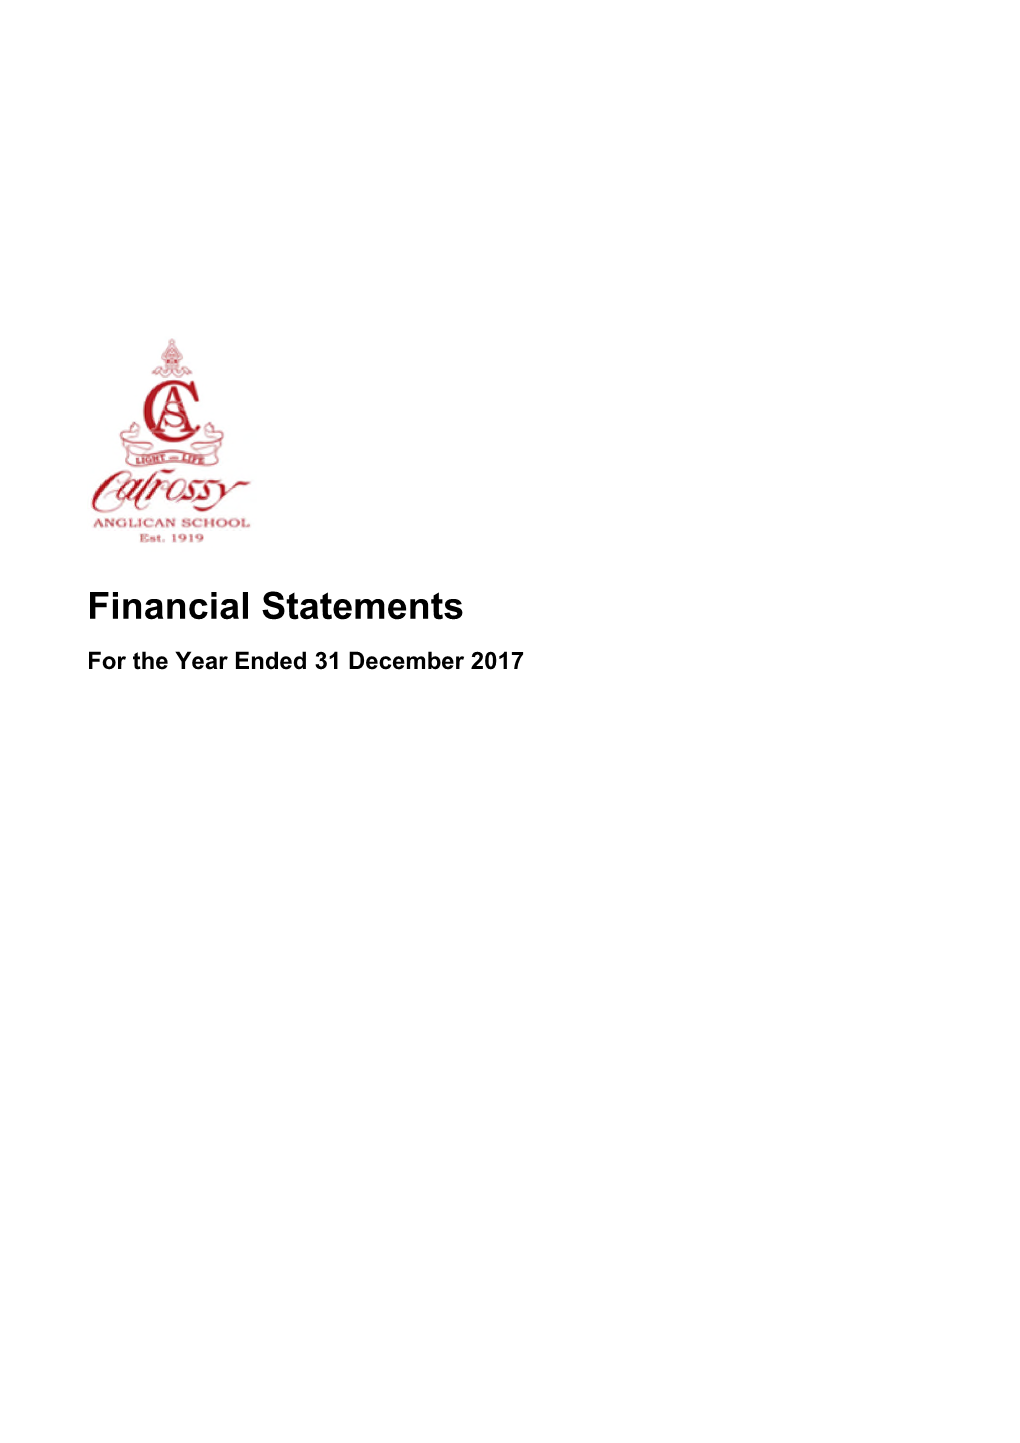 Financial Statements for the Year Ended 31 December 2017 Calrossy Anglican School